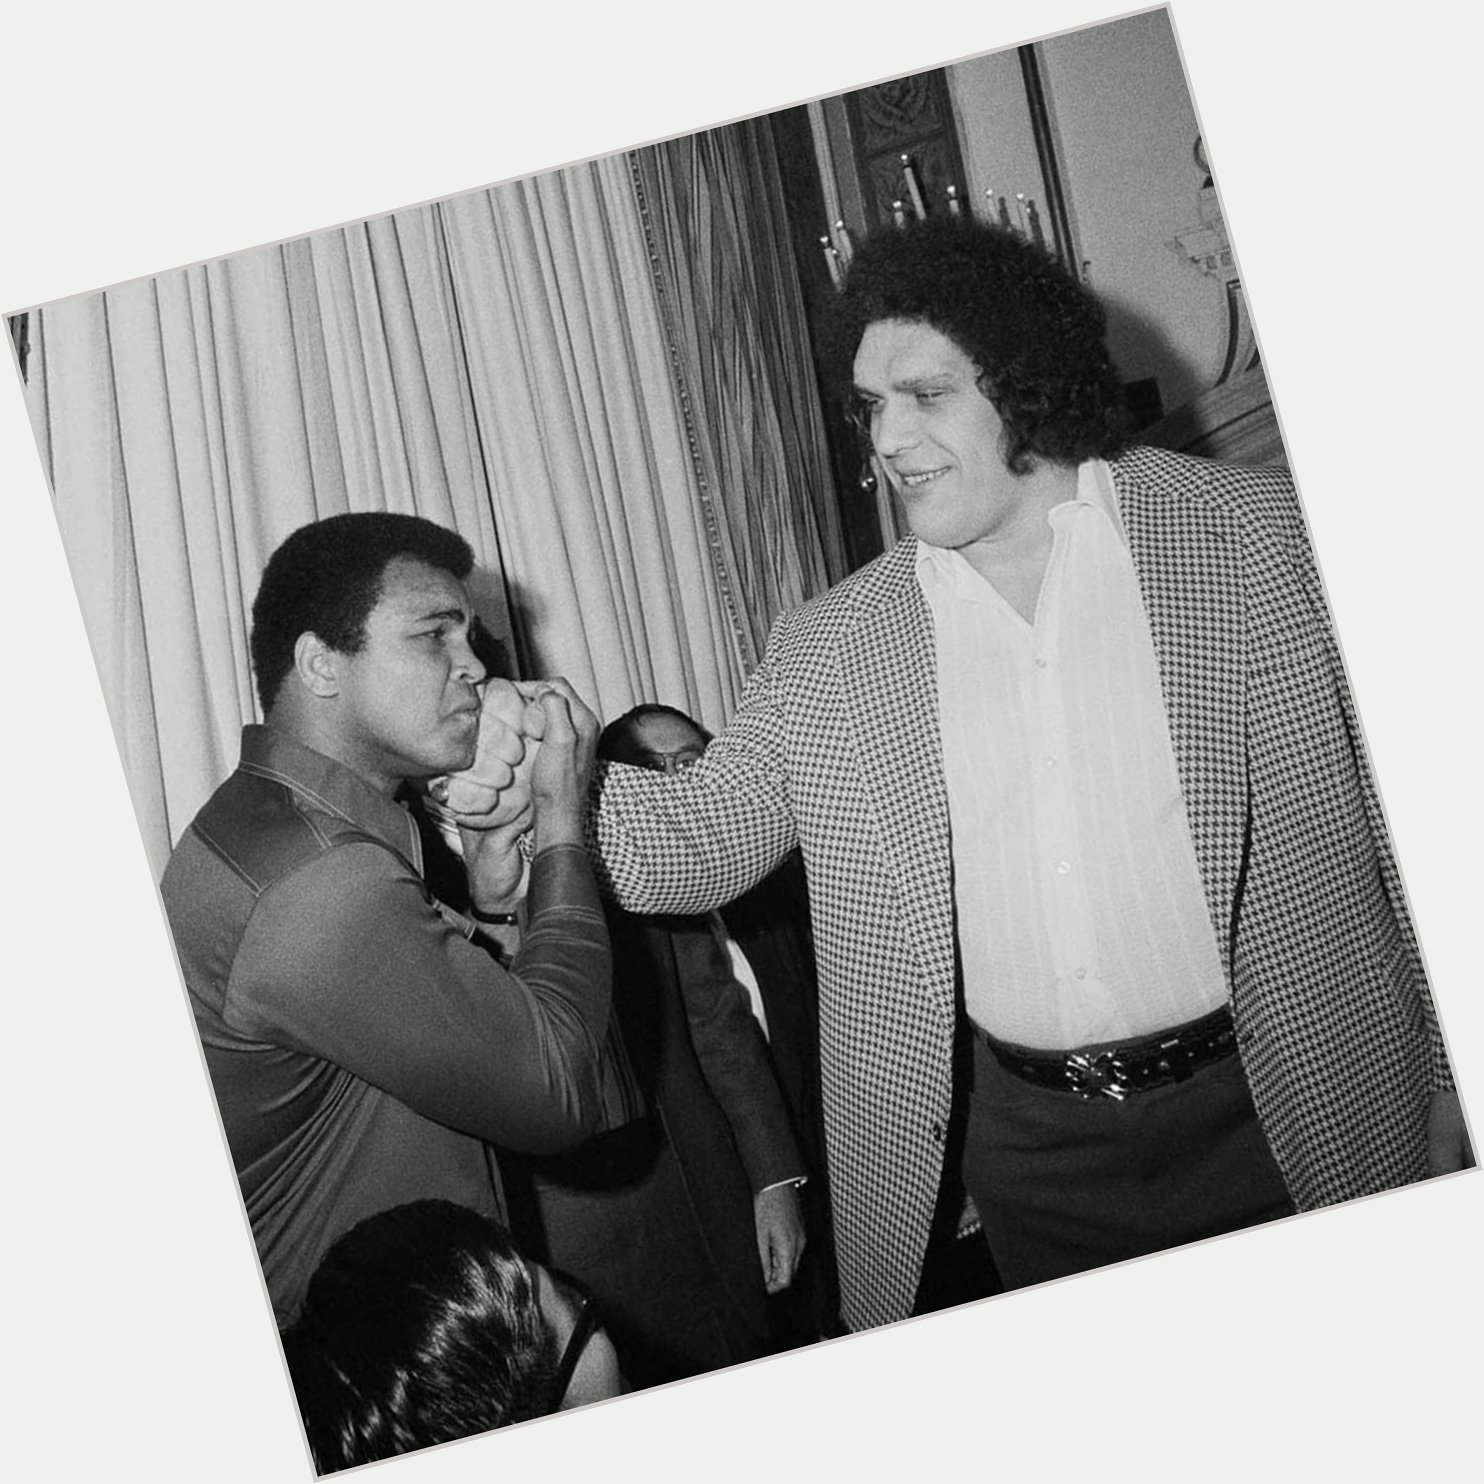 Happy birthday to the Eighth Wonder of the World, Andre the Giant! 